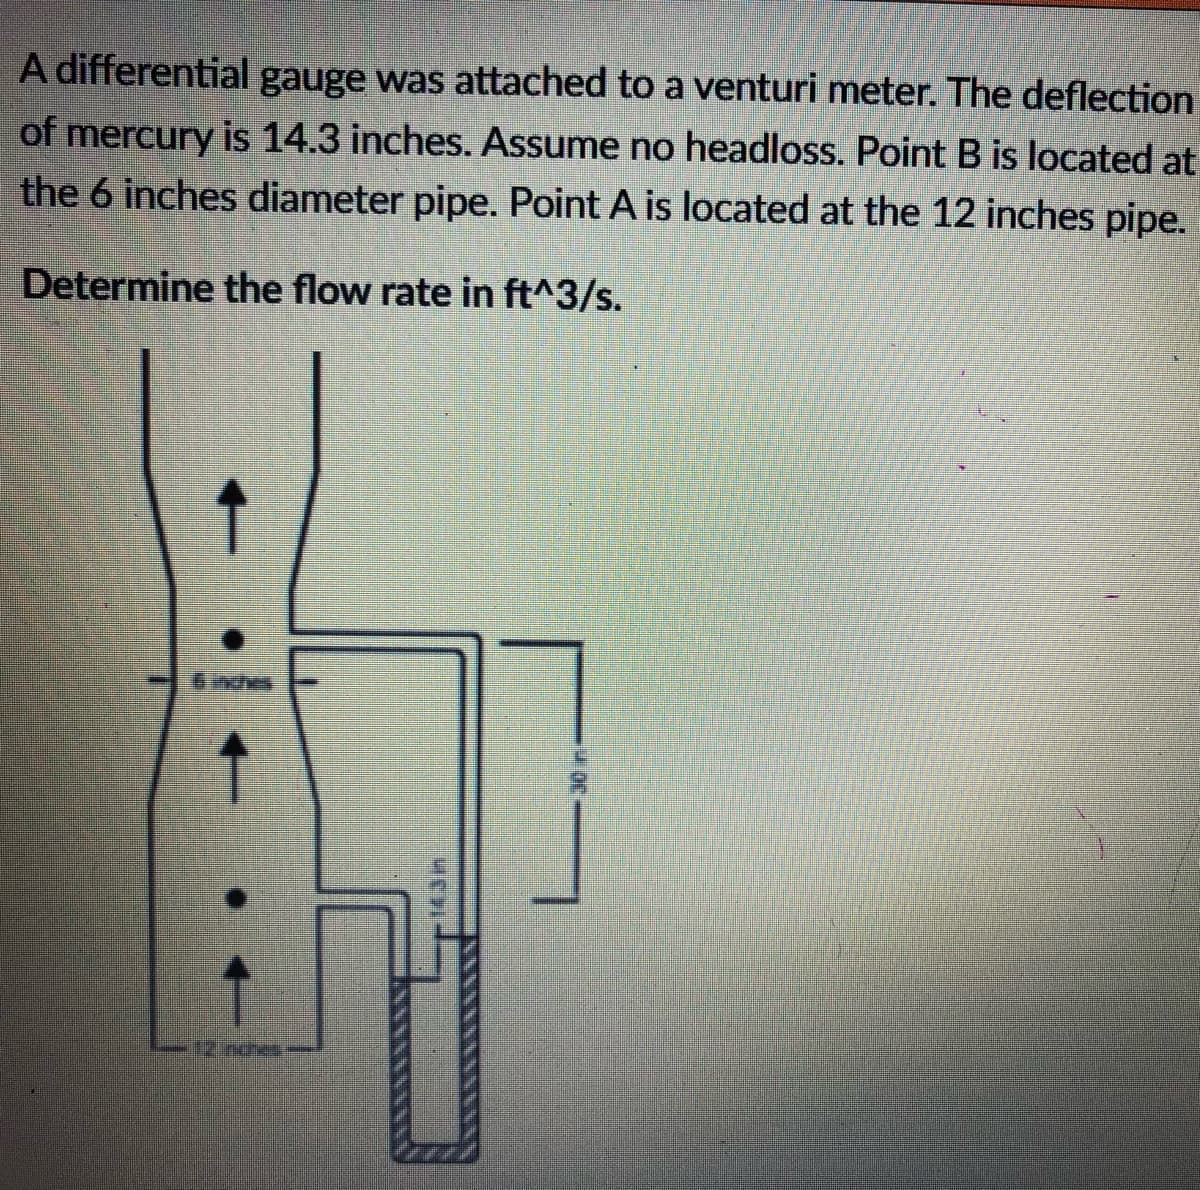 A differential gauge was attached to a venturi meter. The deflection
of mercury is 14.3 inches. Assume no headloss. Point B is located at
the 6 inches diameter pipe. Point A is located at the 12 inches pipe.
Determine the flow rate in ft^3/s.
↑
UCHI